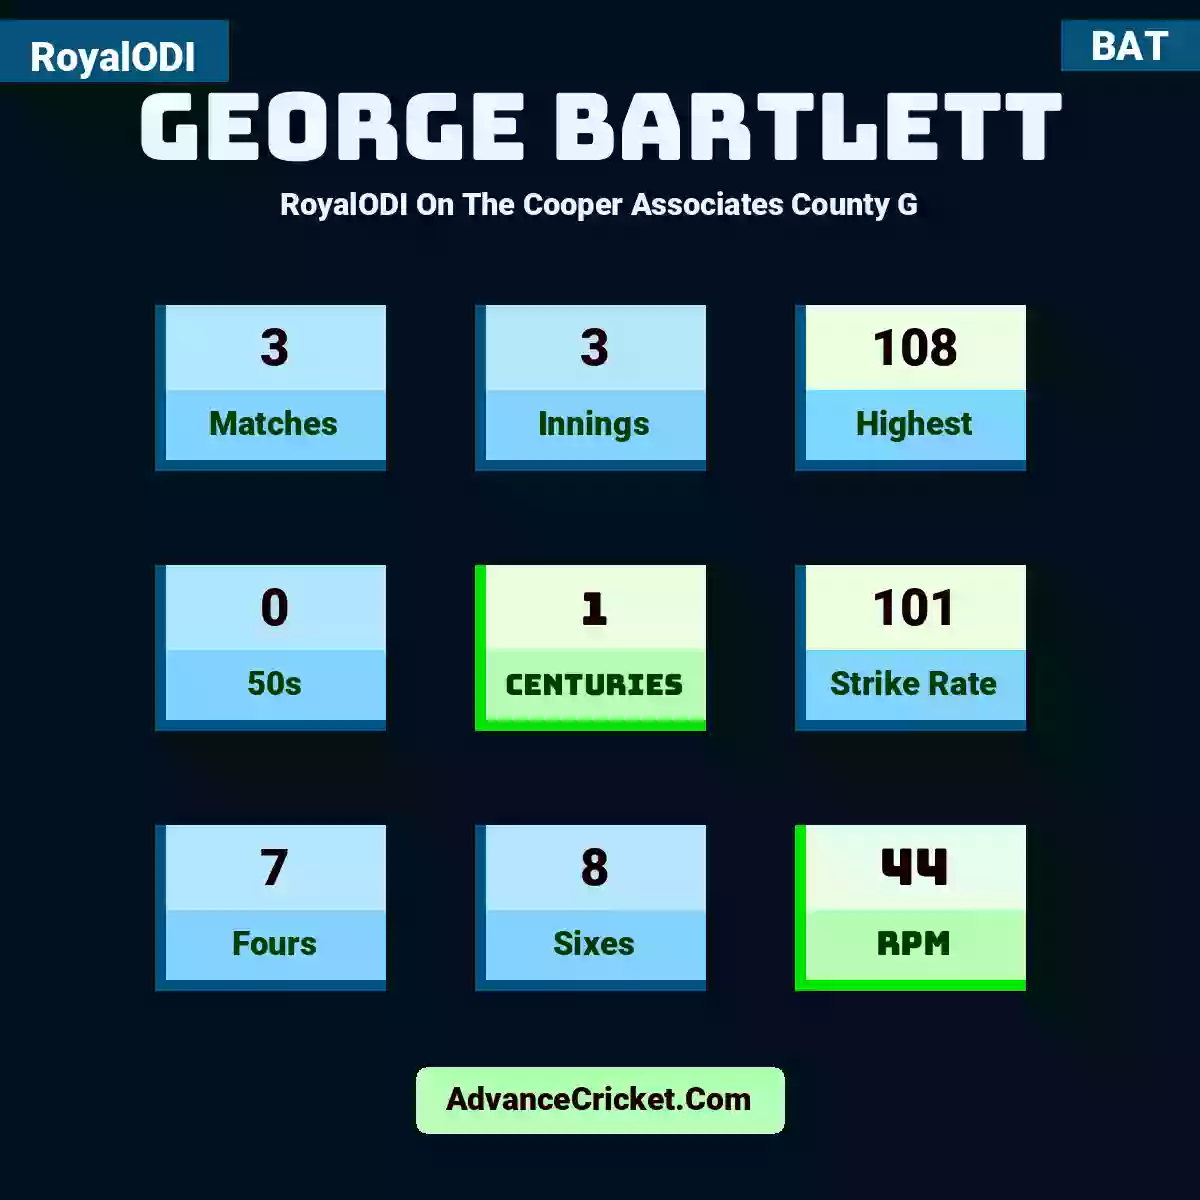 George Bartlett RoyalODI  On The Cooper Associates County G, George Bartlett played 3 matches, scored 108 runs as highest, 0 half-centuries, and 1 centuries, with a strike rate of 101. G.Bartlett hit 7 fours and 8 sixes, with an RPM of 44.